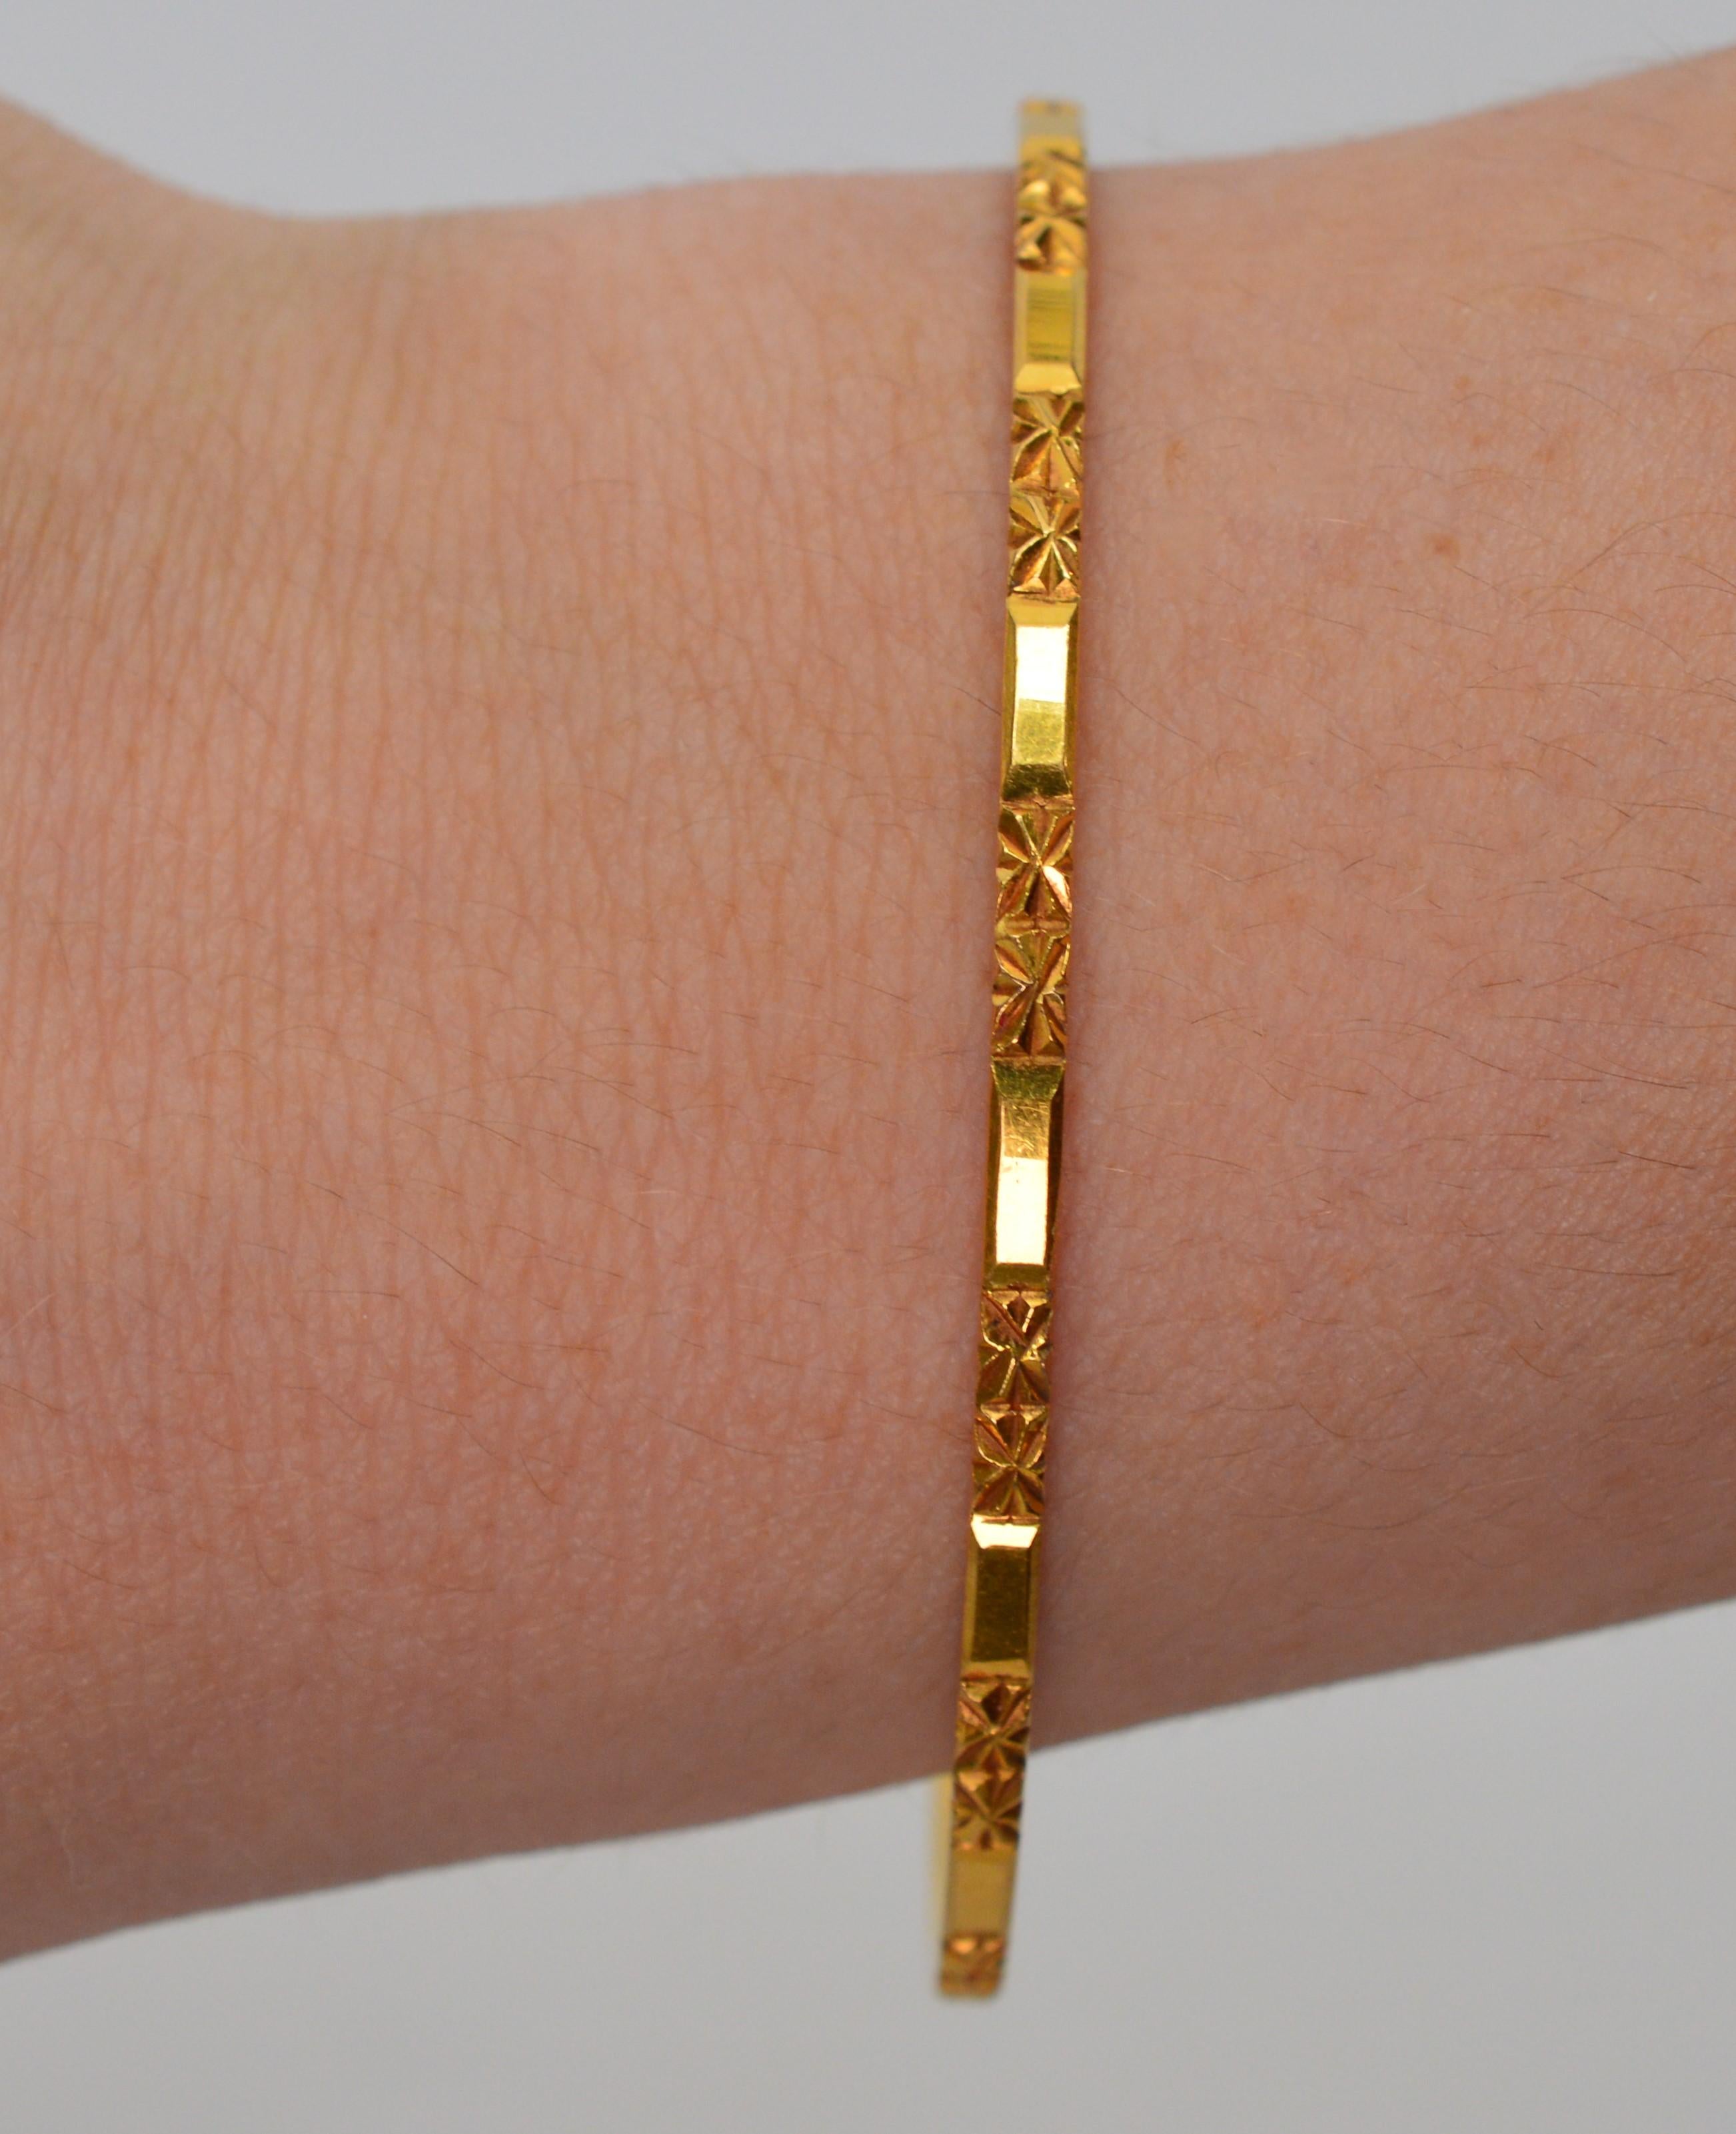 This simple but elegant eighteen karat 18K yellow gold bangle bracelet is sure to get compliments.  Stylishly slim and lends just the right touch of gold to any look. Measures 2-3/8 inches in diameter, made for smaller wrists. Inside circumference